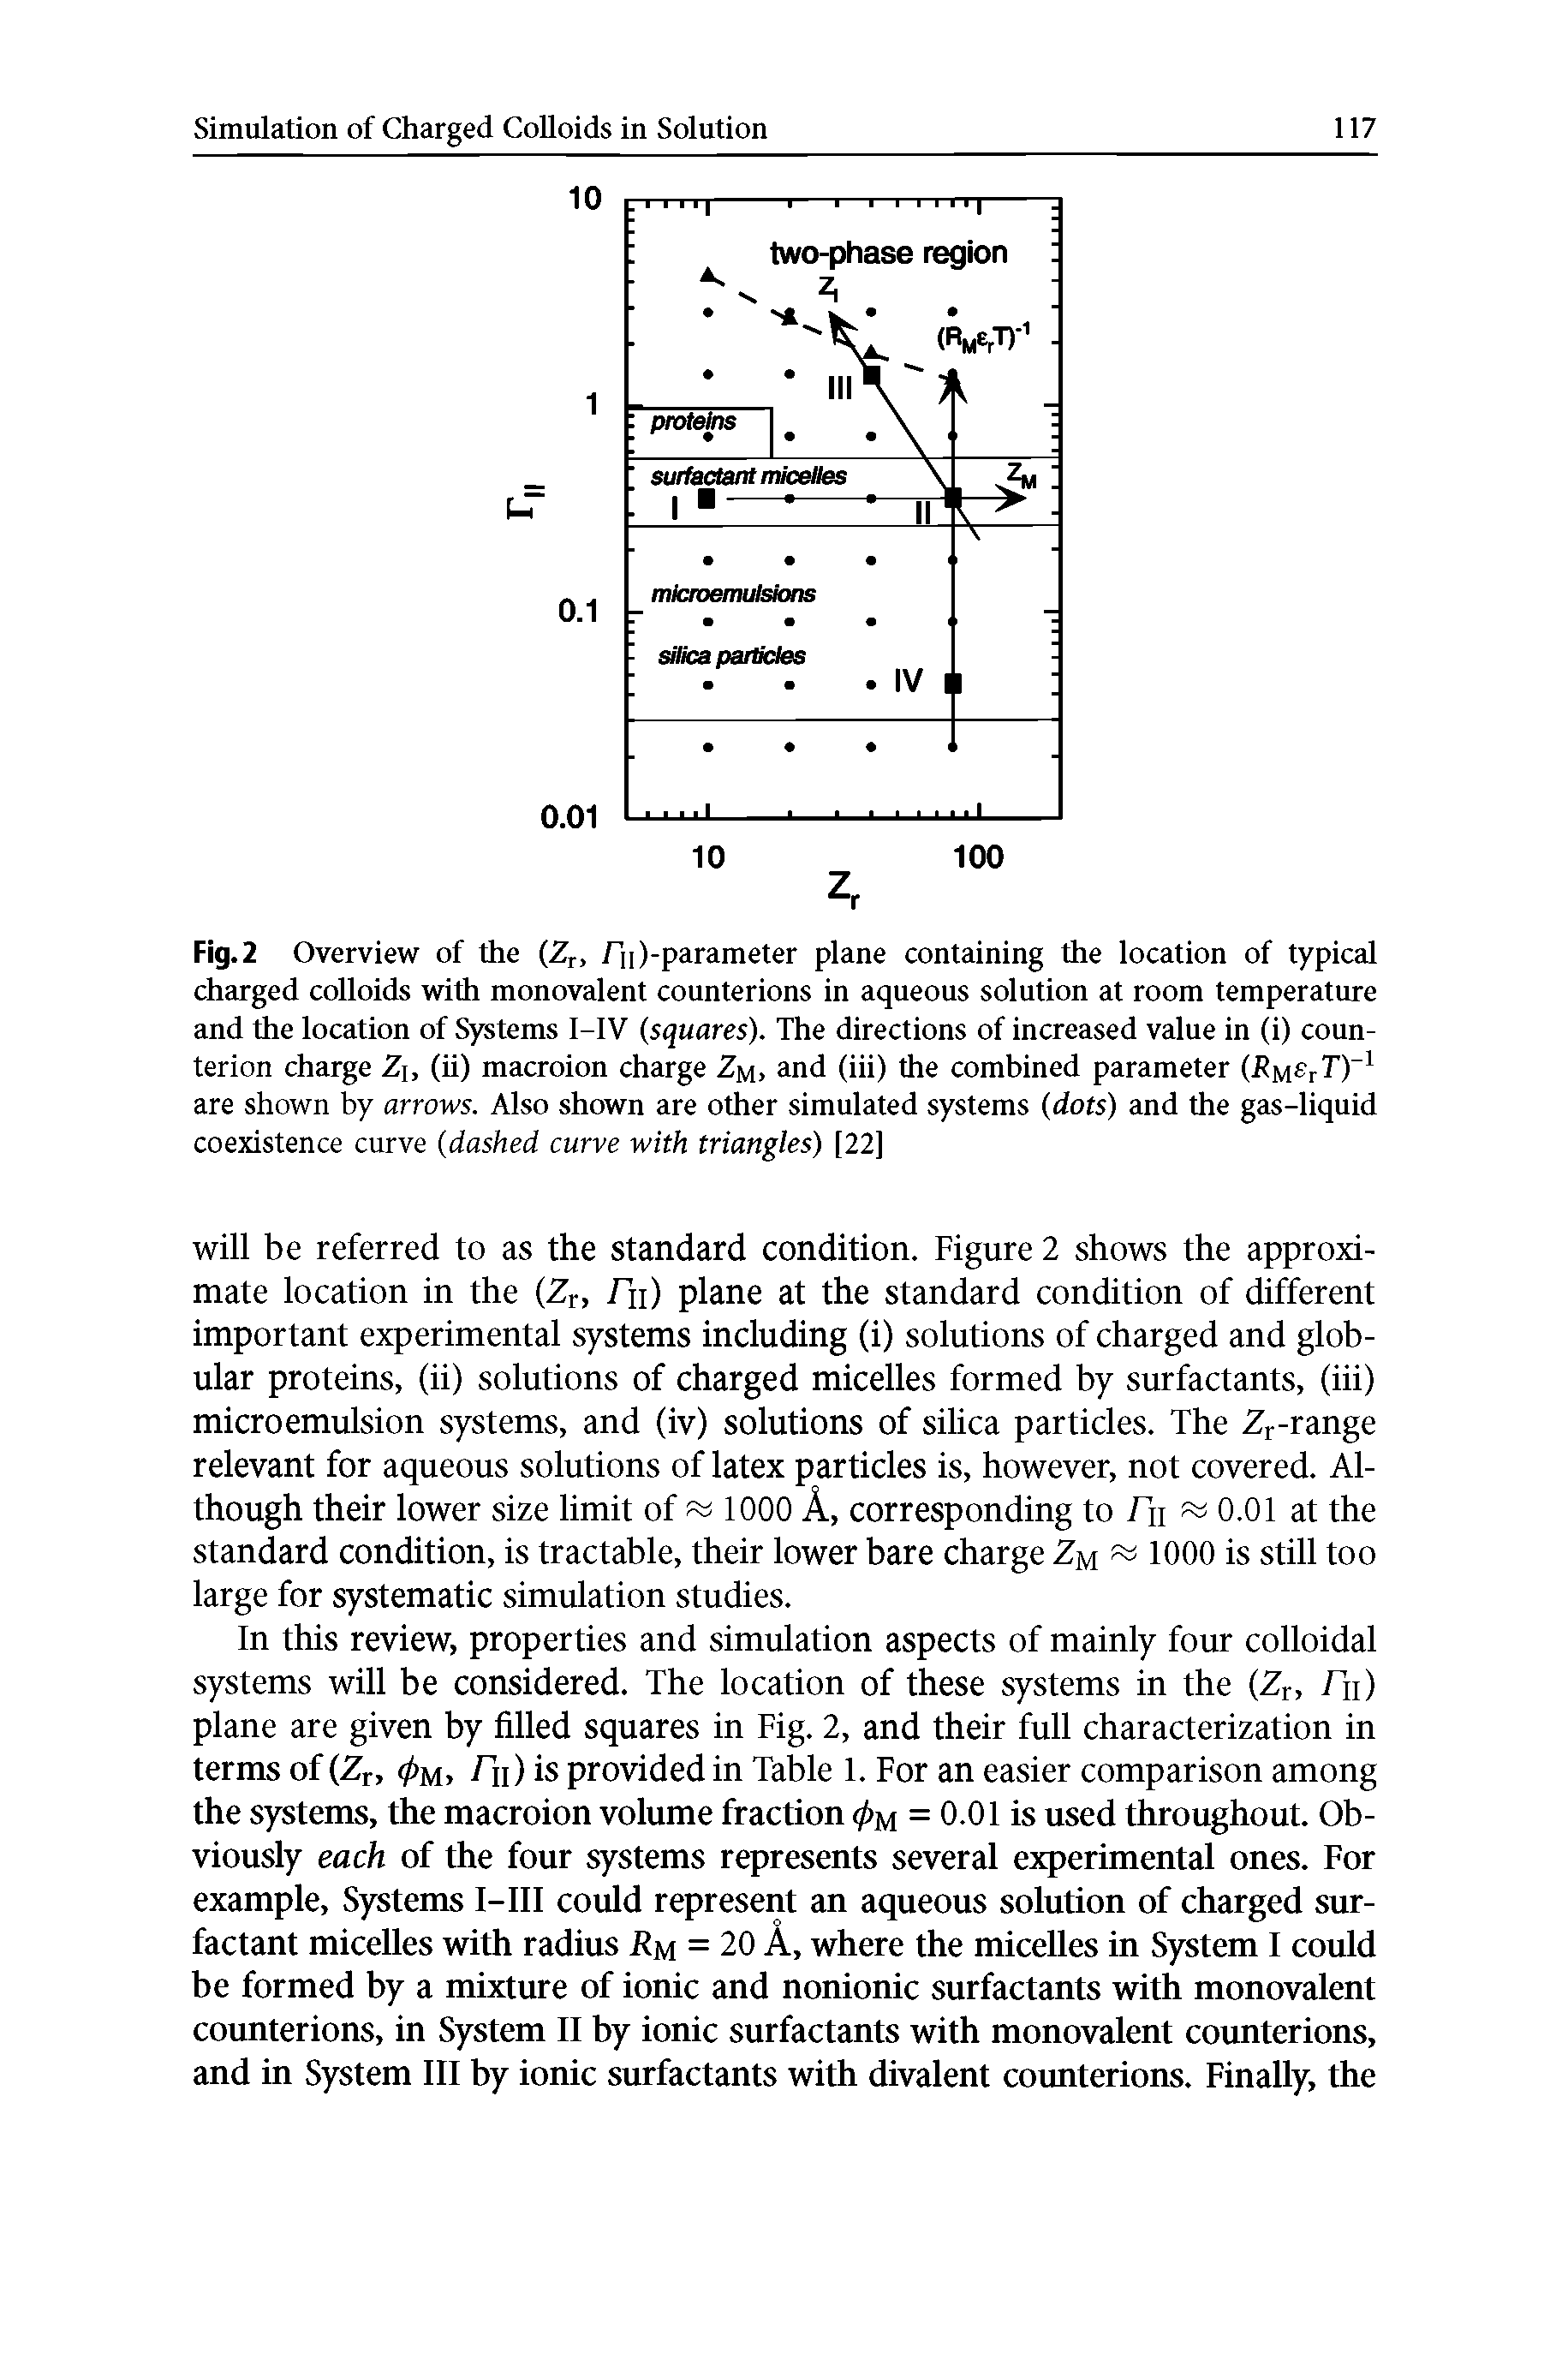 Fig. 2 Overview of the (2r, rn)-parameter plane containing the location of typical charged colloids with monovalent counterions in aqueous solution at room temperature and the location of Systems I-IV (squares). The directions of increased value in (i) counterion charge Z, (ii) macroion charge Zm, and (iii) the combined parameter are shown by arrows. Also shown are other simulated systems (dots) and the gas-liquid coexistence curve (dashed curve with triangles) [22]...